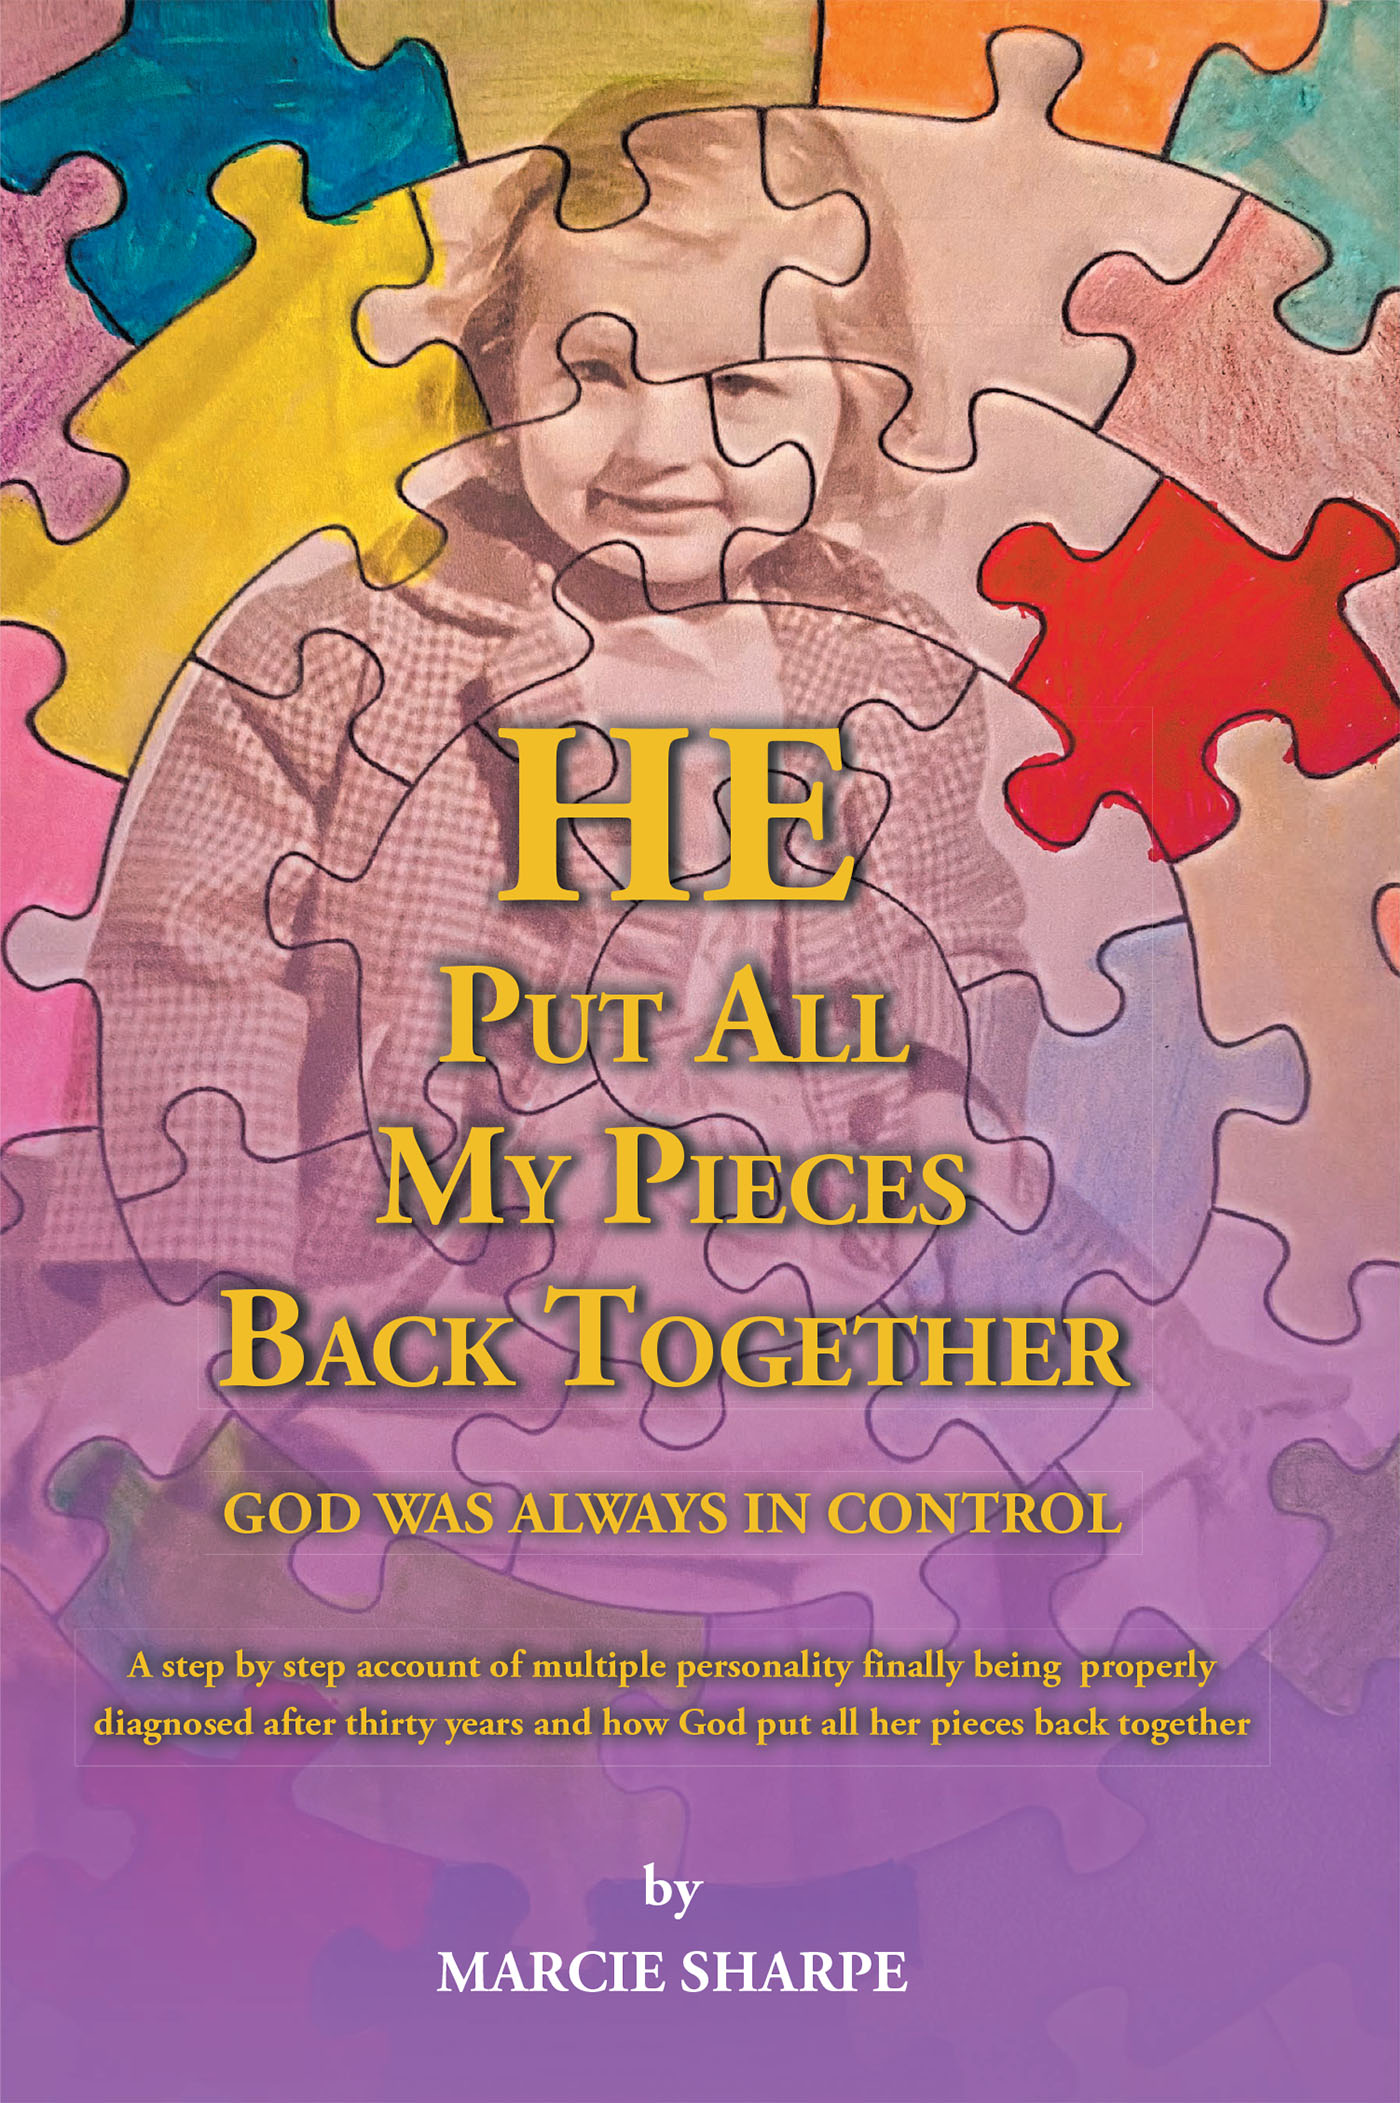 Marcie Sharpe’s Newly Released “He Put All My Pieces Back Together: God Was Always In Control” is a Compelling and Inspirational Memoir